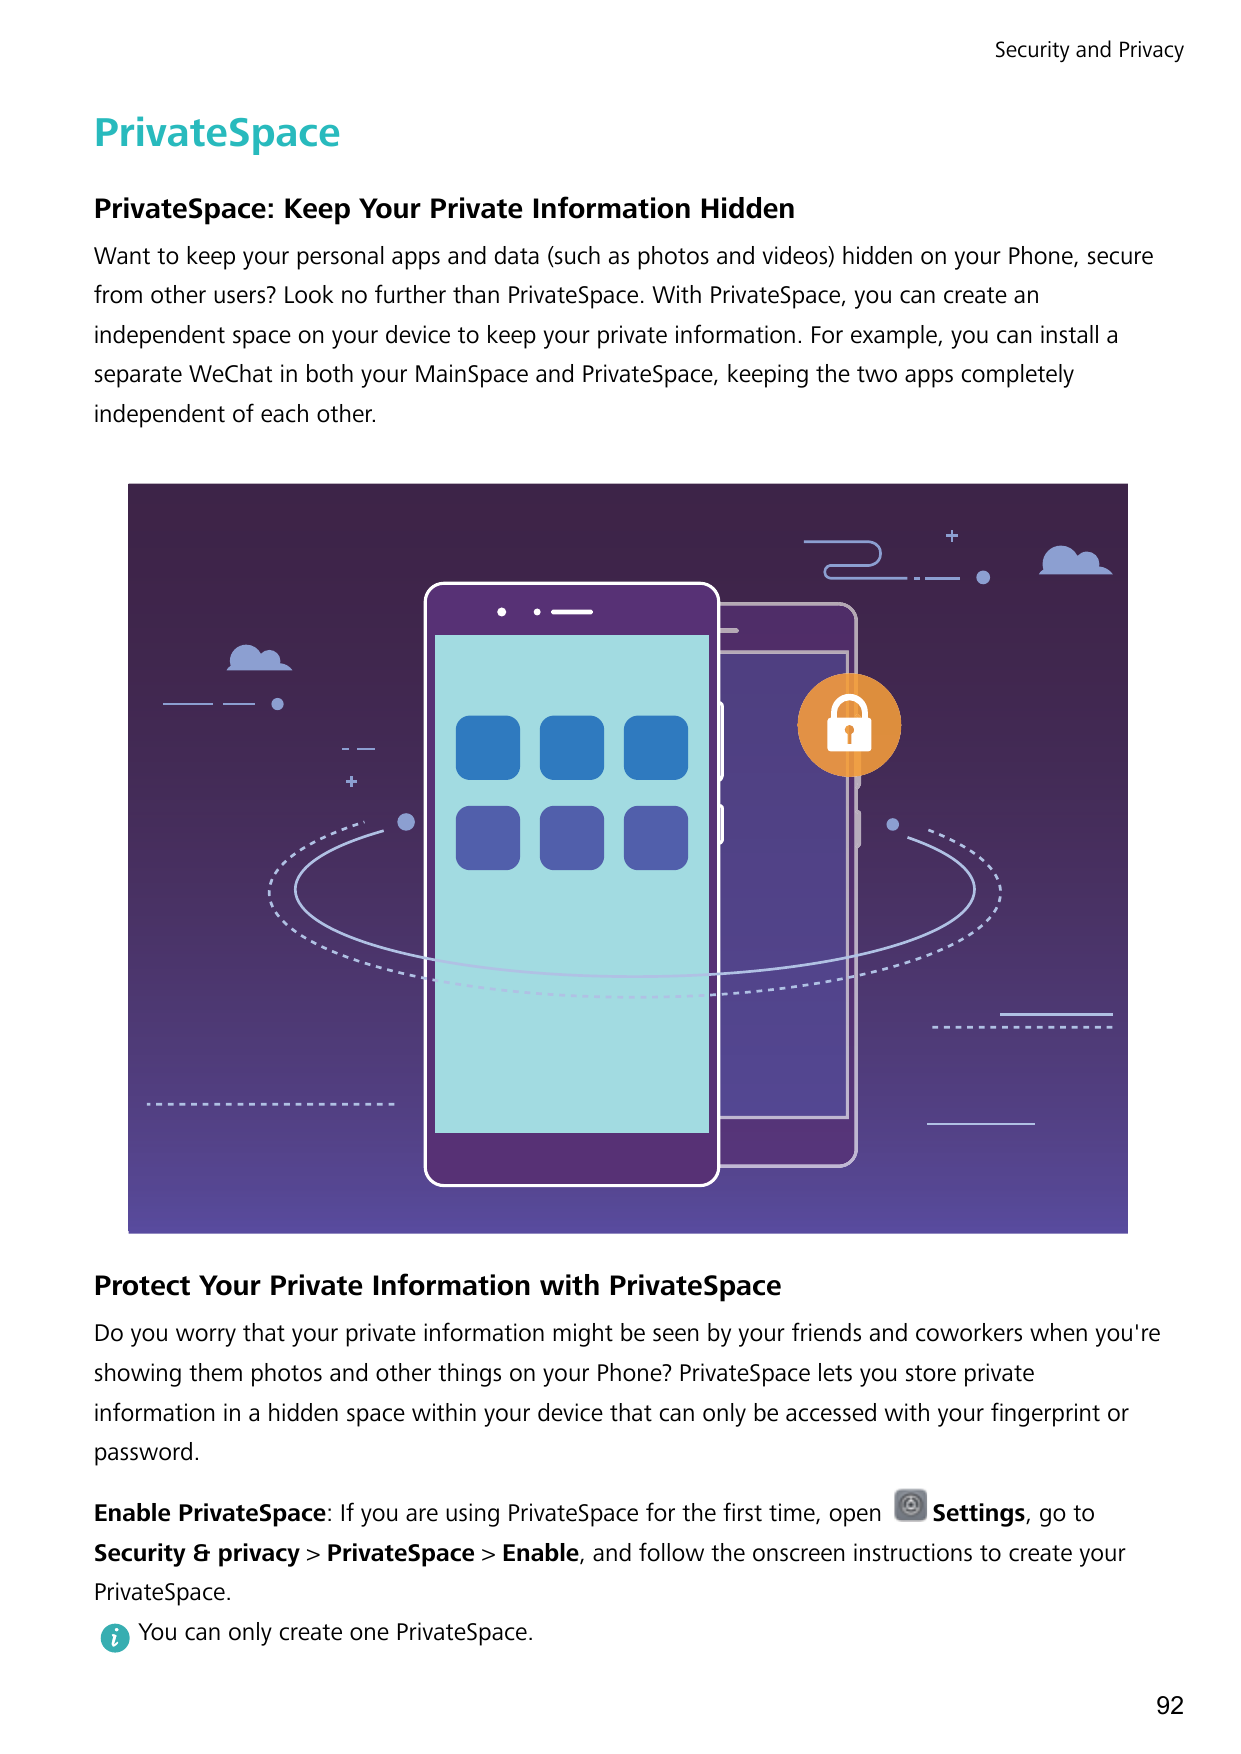 Security and PrivacyPrivateSpacePrivateSpace: Keep Your Private Information HiddenWant to keep your personal apps and data (such